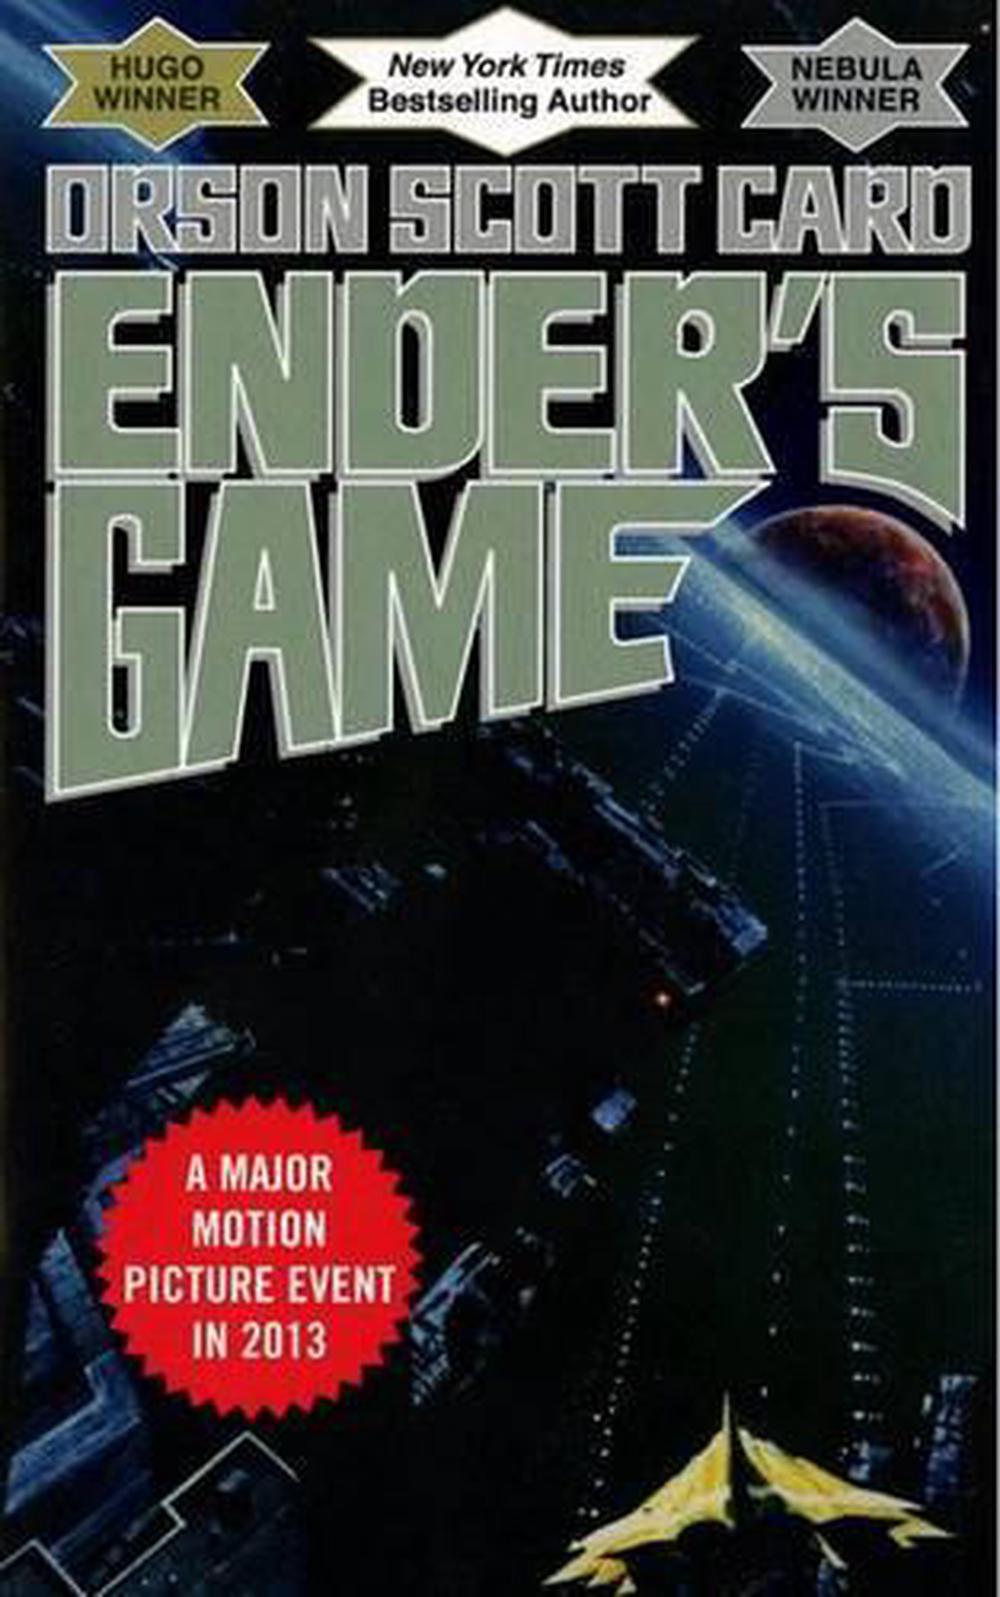 Ender’s Game by Orson Scott Card